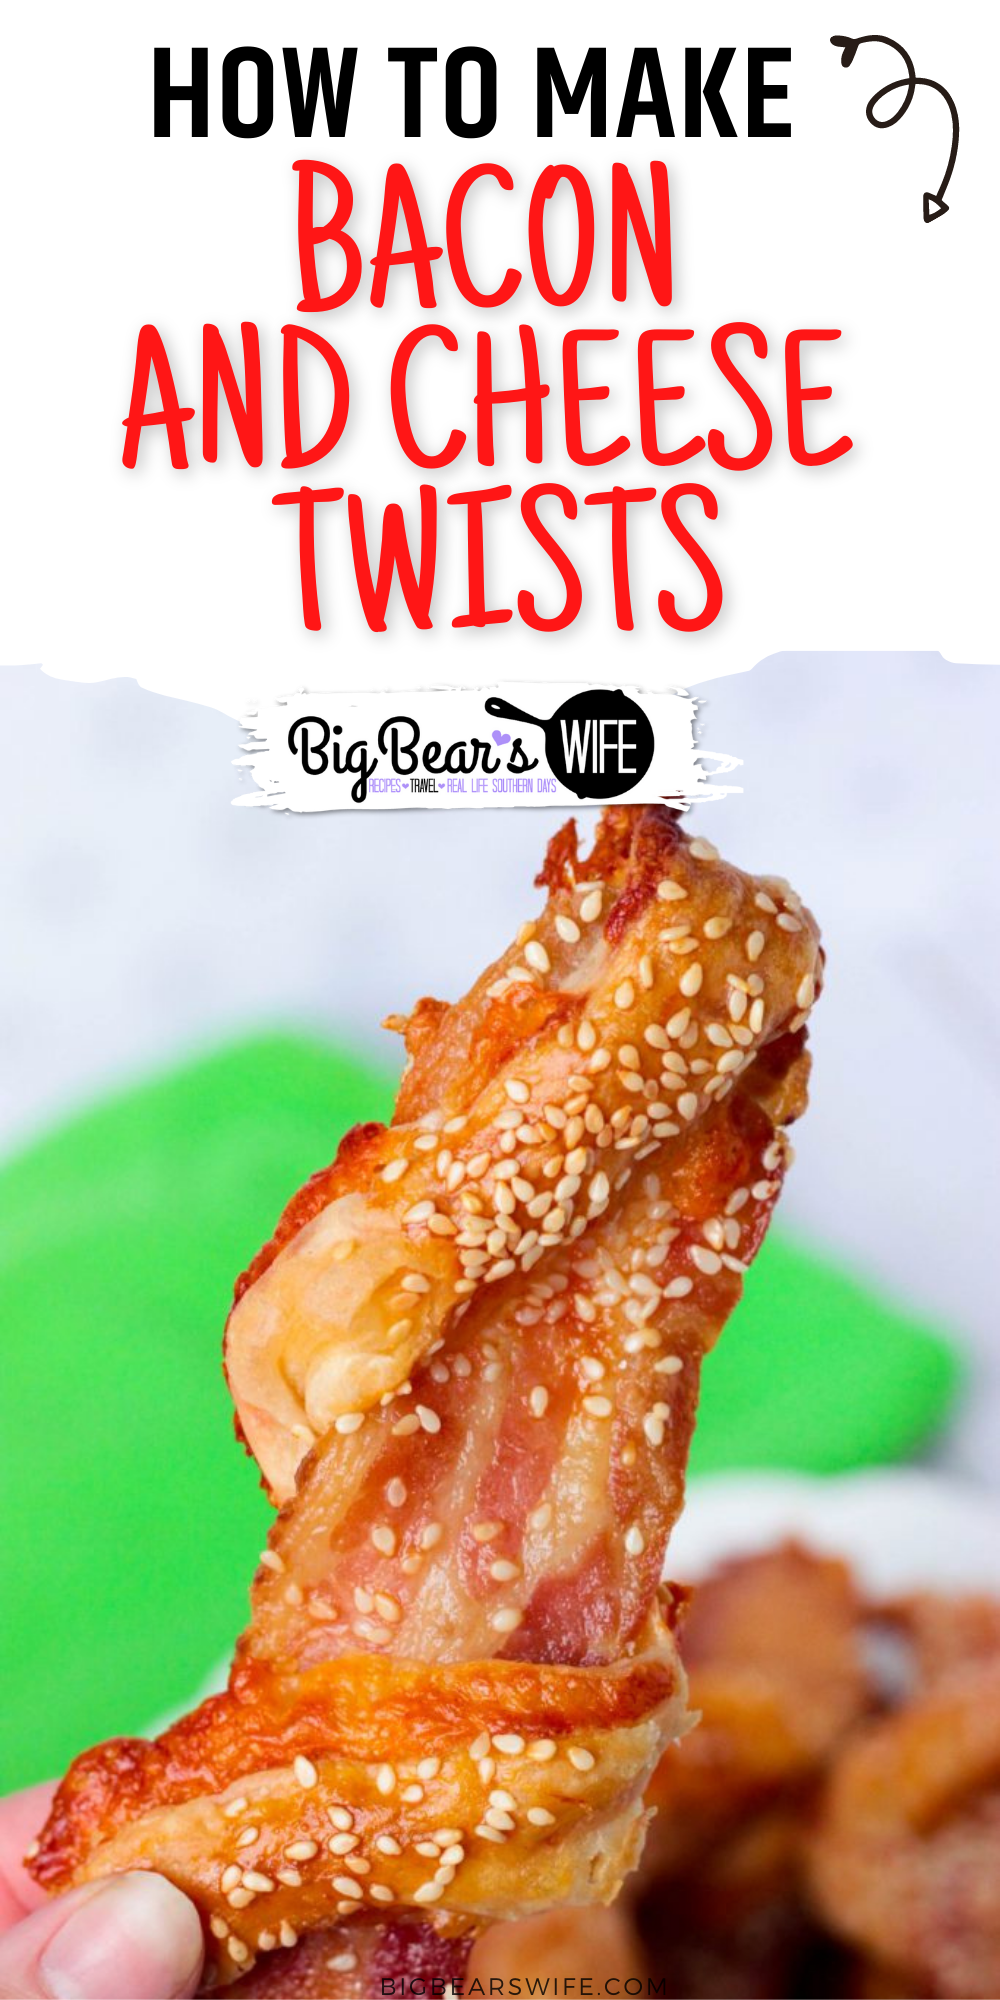 A few simple ingredients plus a bit of oven time and you've got fantastic Bacon and Cheese Twists that are perfect for Breakfast or Brunch! Serve them along side scrambled eggs or cooked sausage with ketchup or BBQ sauce for dipping!  via @bigbearswife